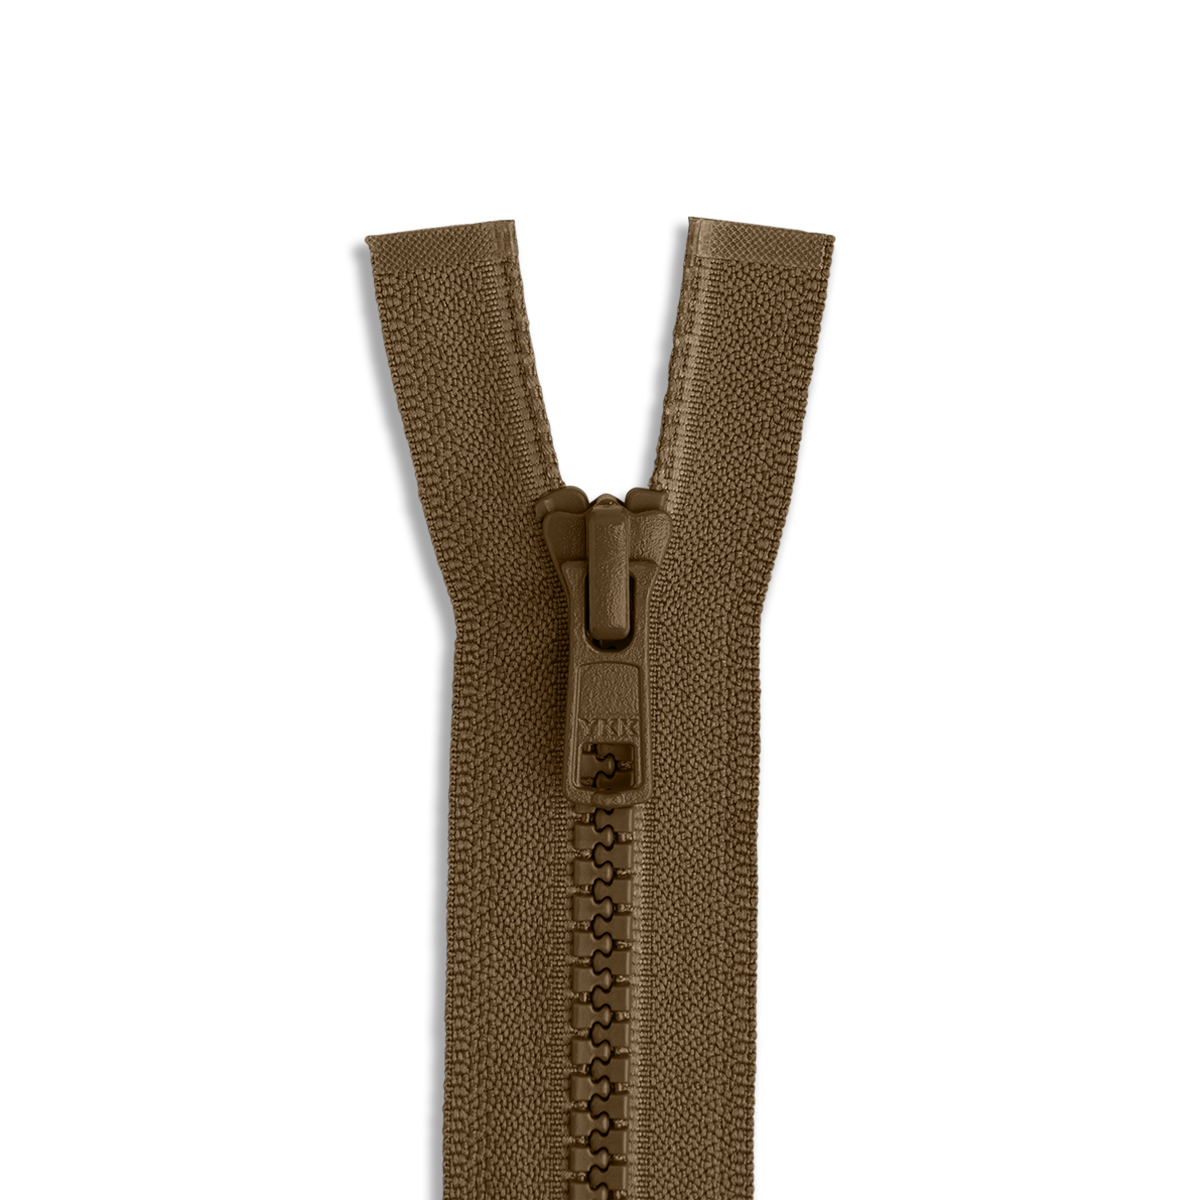 Why YKK zippers are the brown M&Ms of product design: look at the